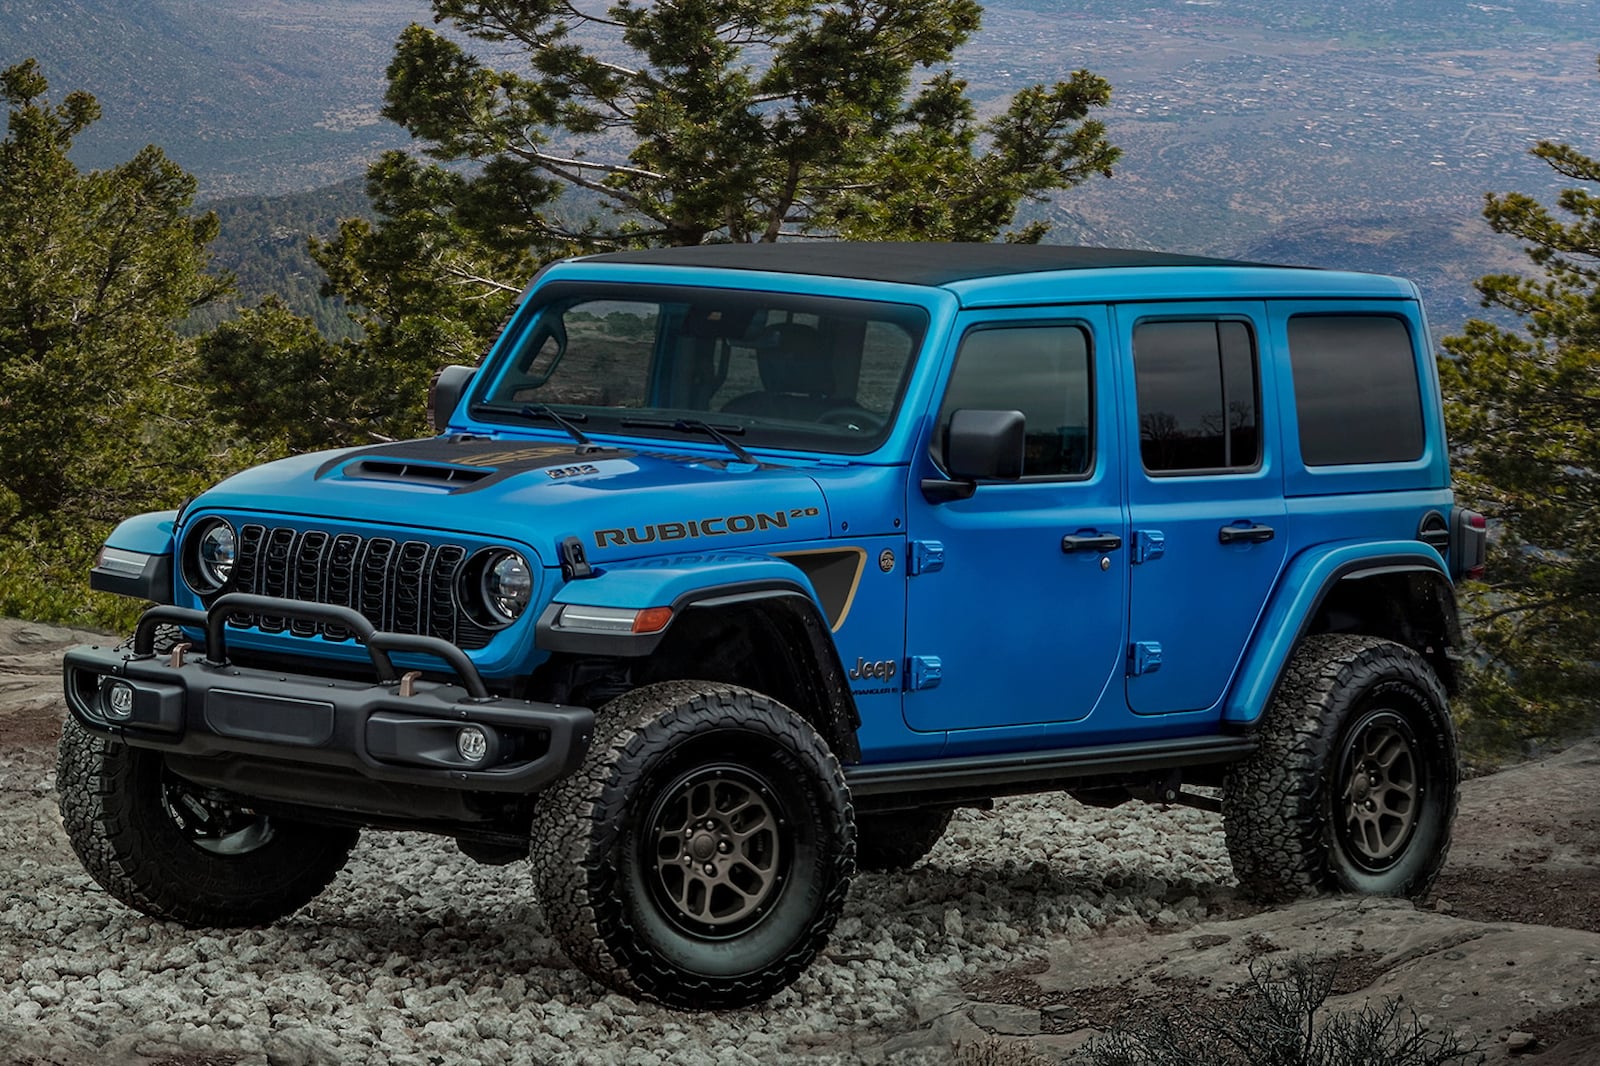 Jeep Wrangler Rubicon 392 Generations: All Model Years | CarBuzz